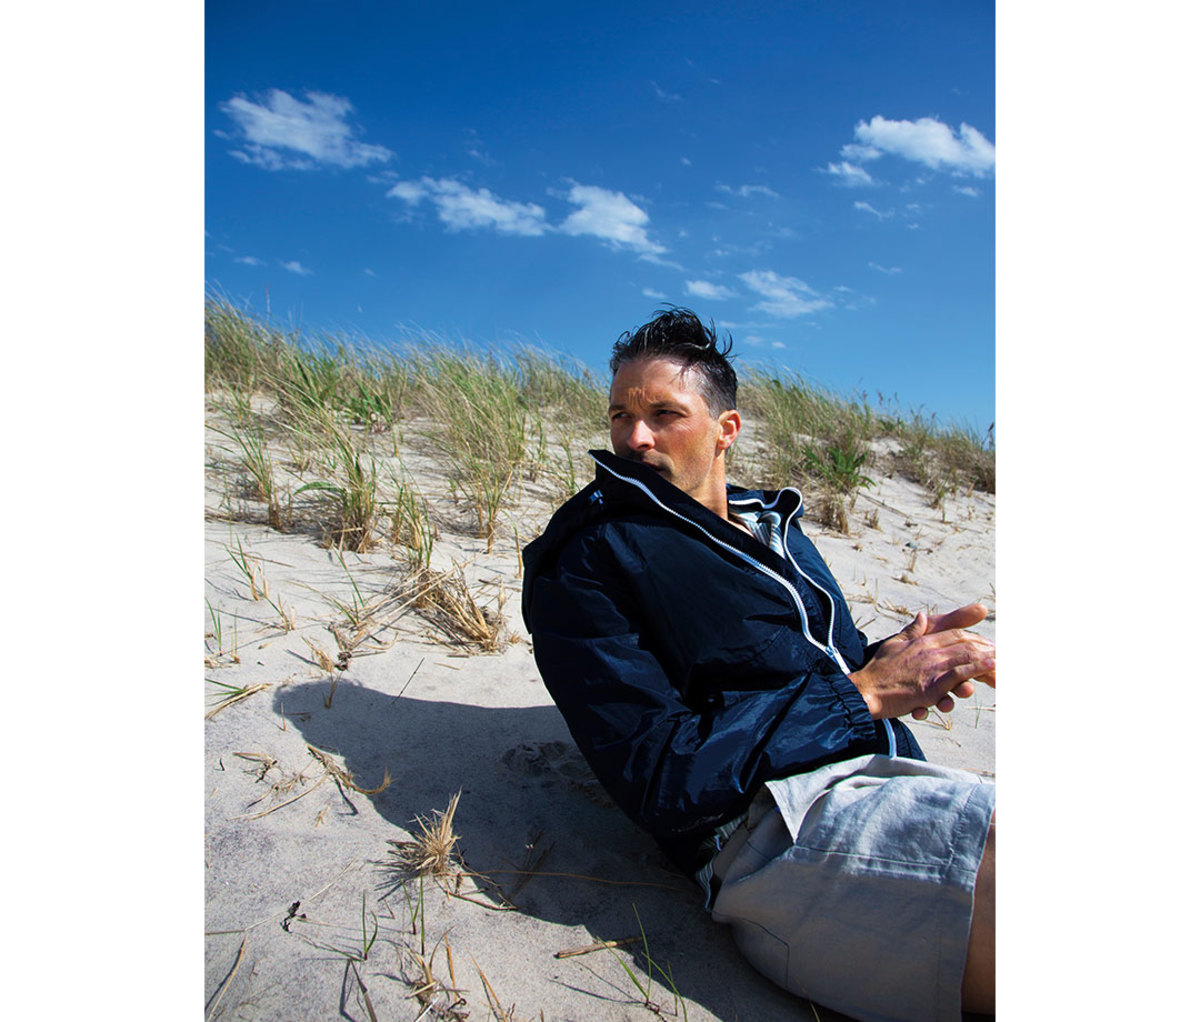 Man sitting on beach wearing blue hoodie and shorts